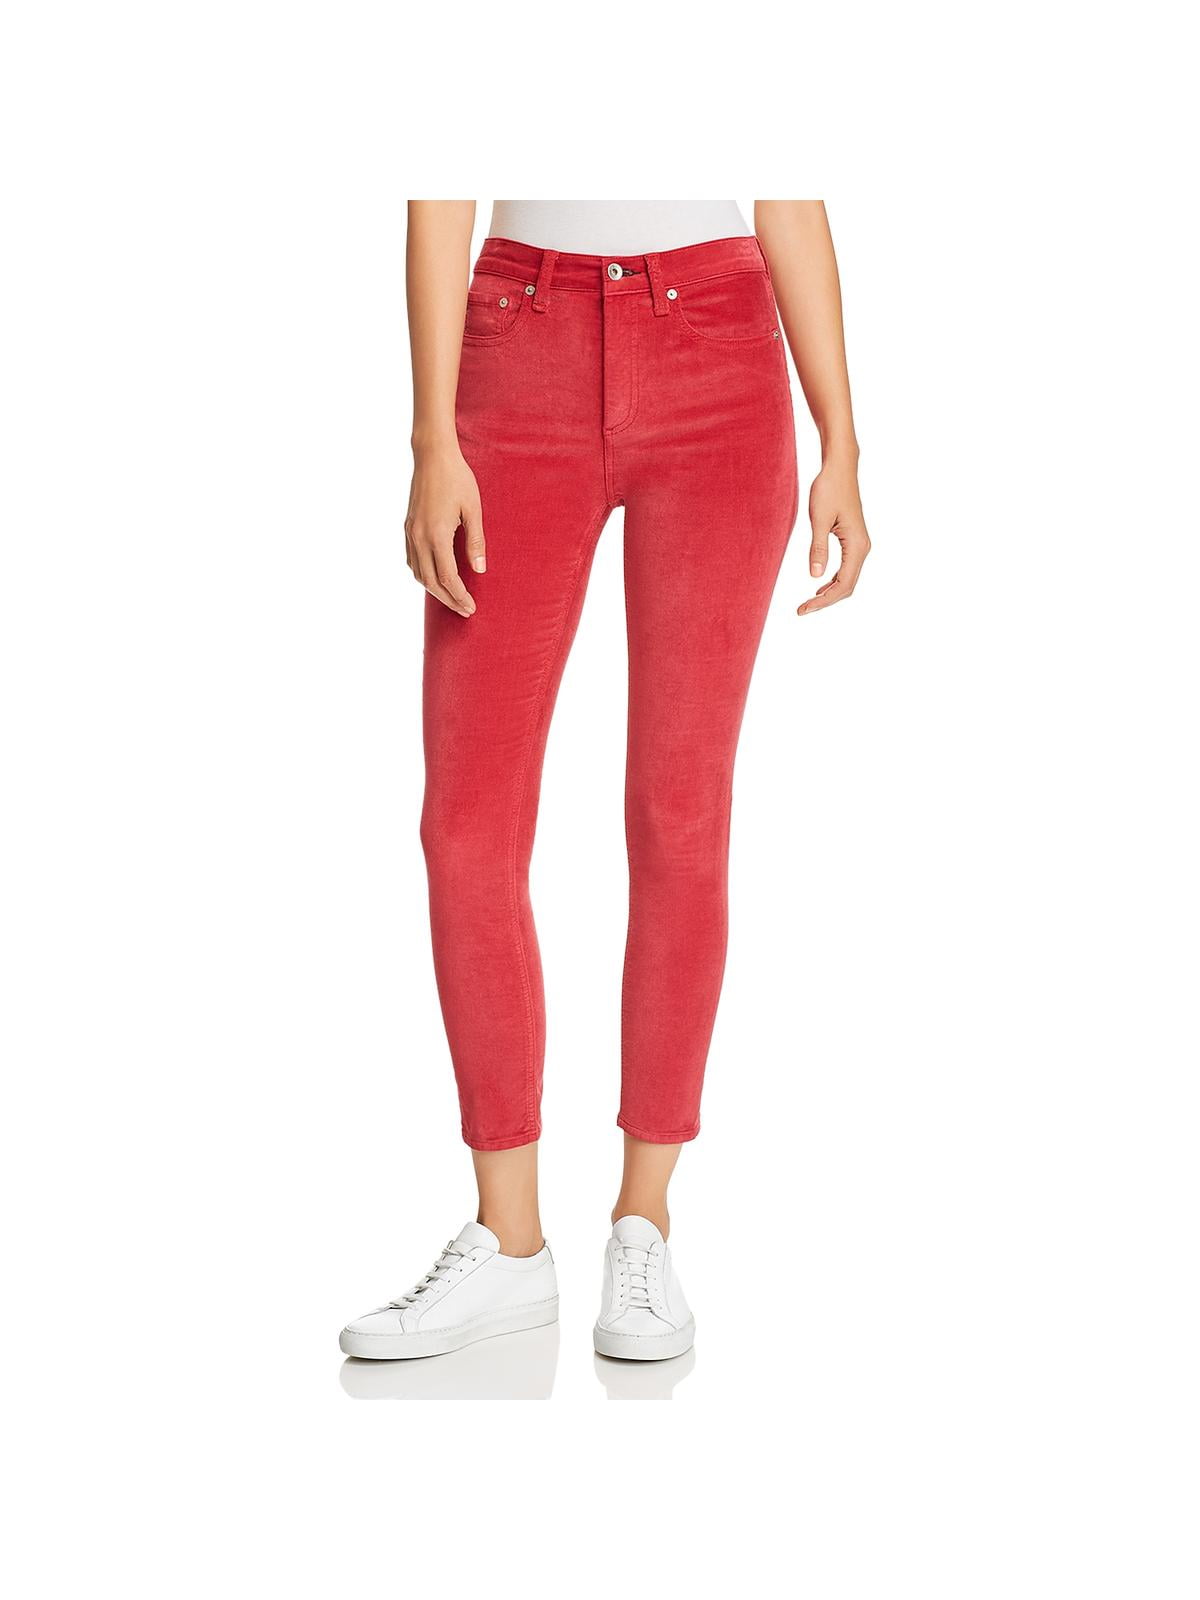 high rise colored jeans